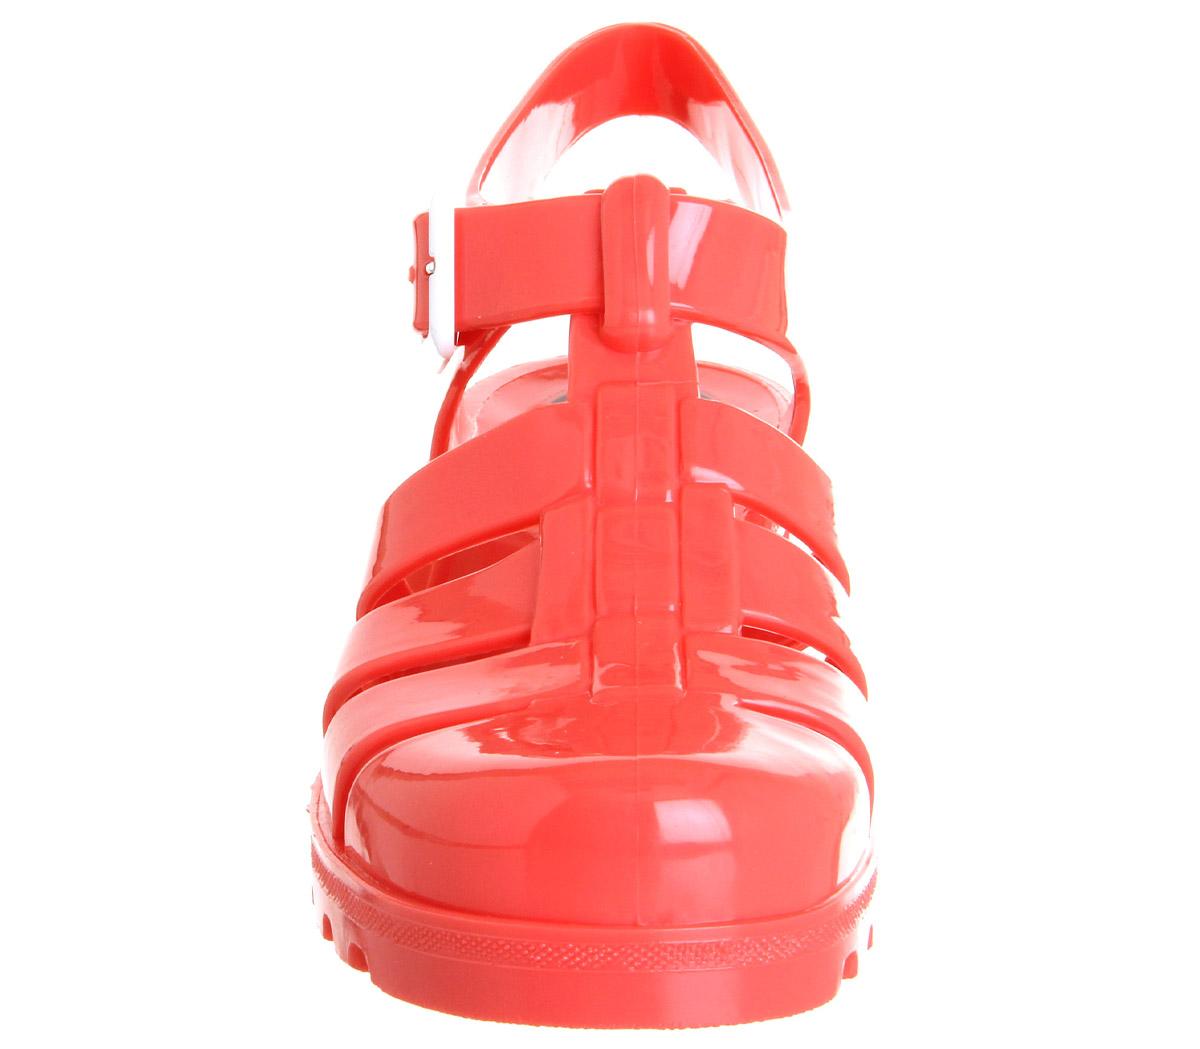 JuJu Babe Hi Jelly Shoes Coral - Sandals